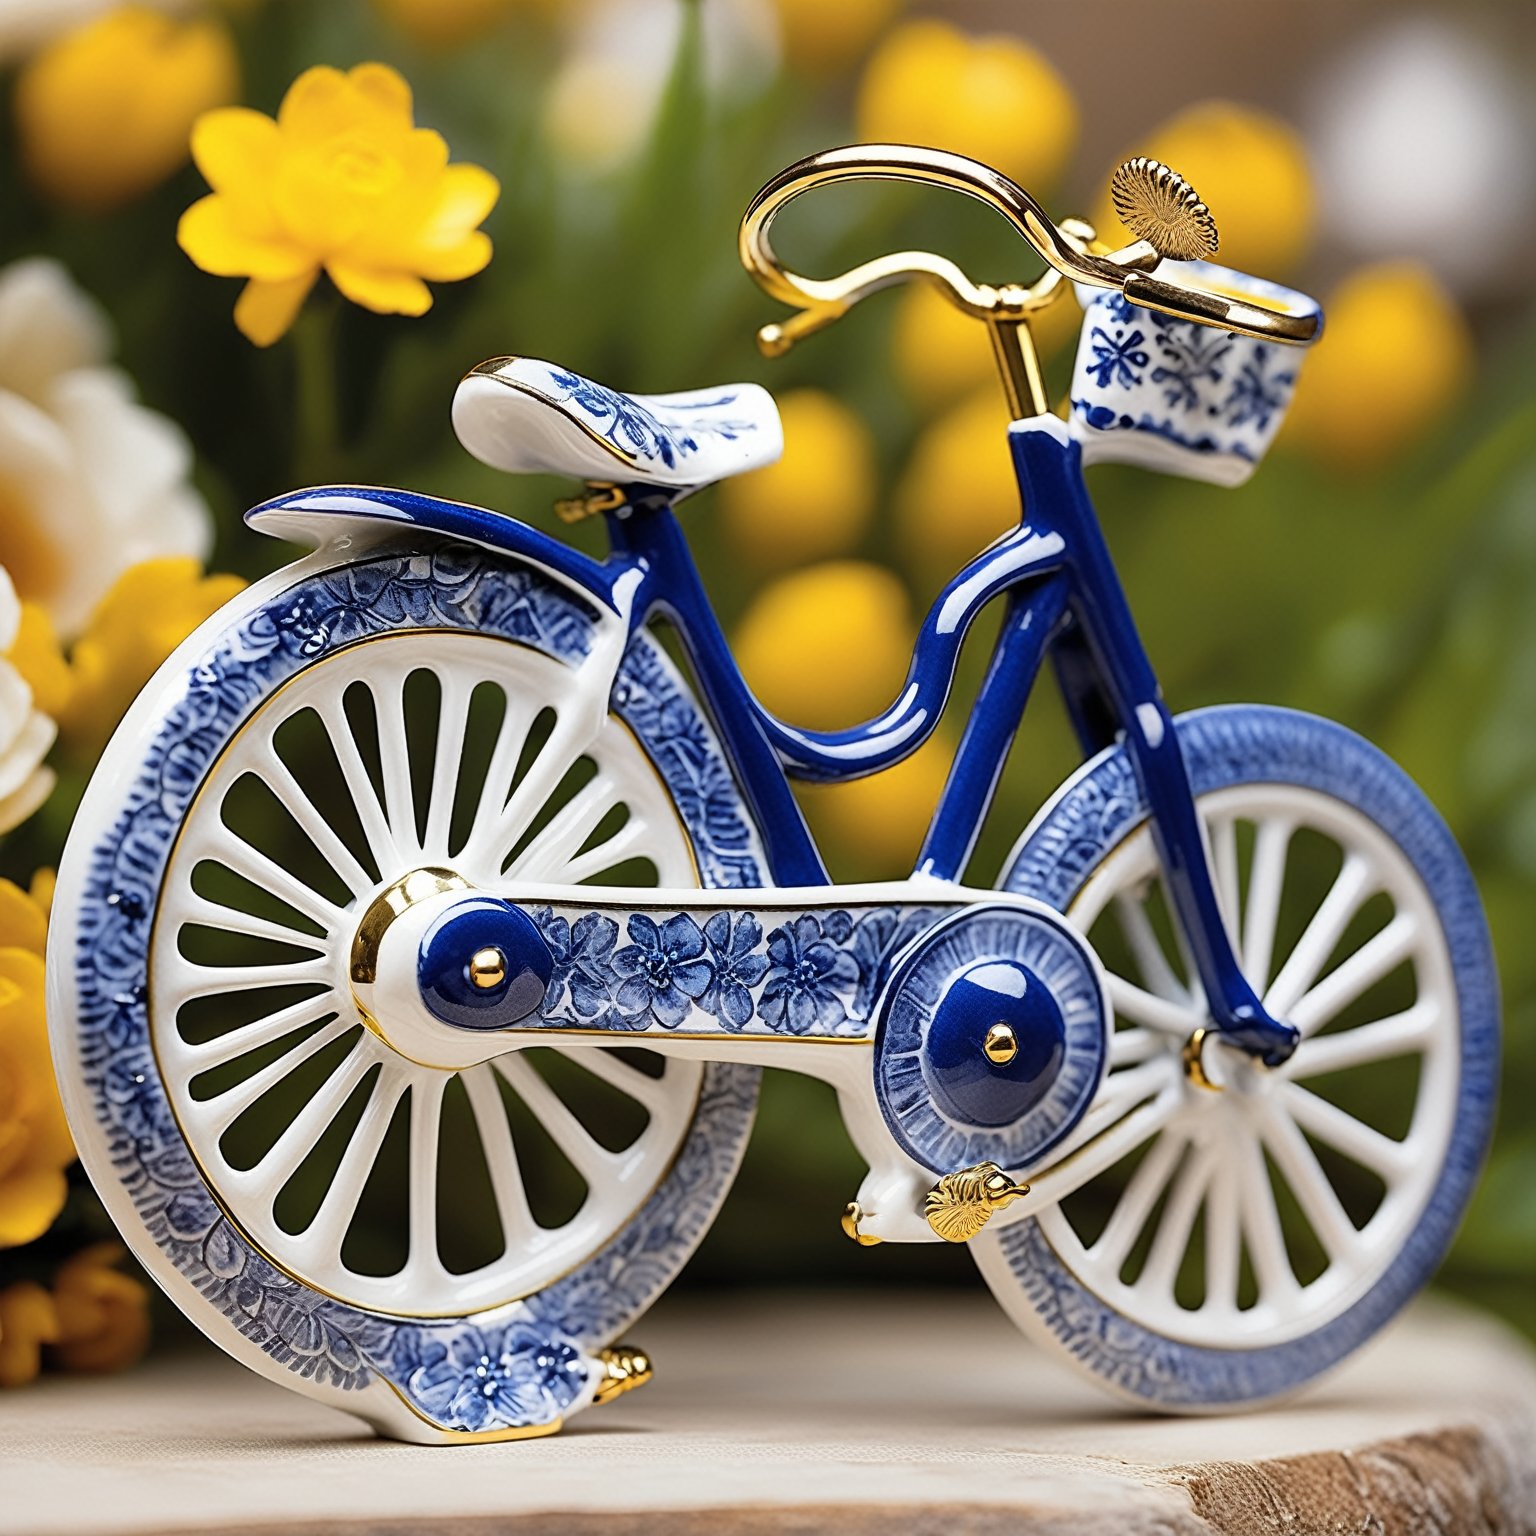 A beautifully crafted ceramic or porcelain figurine of a bicyle